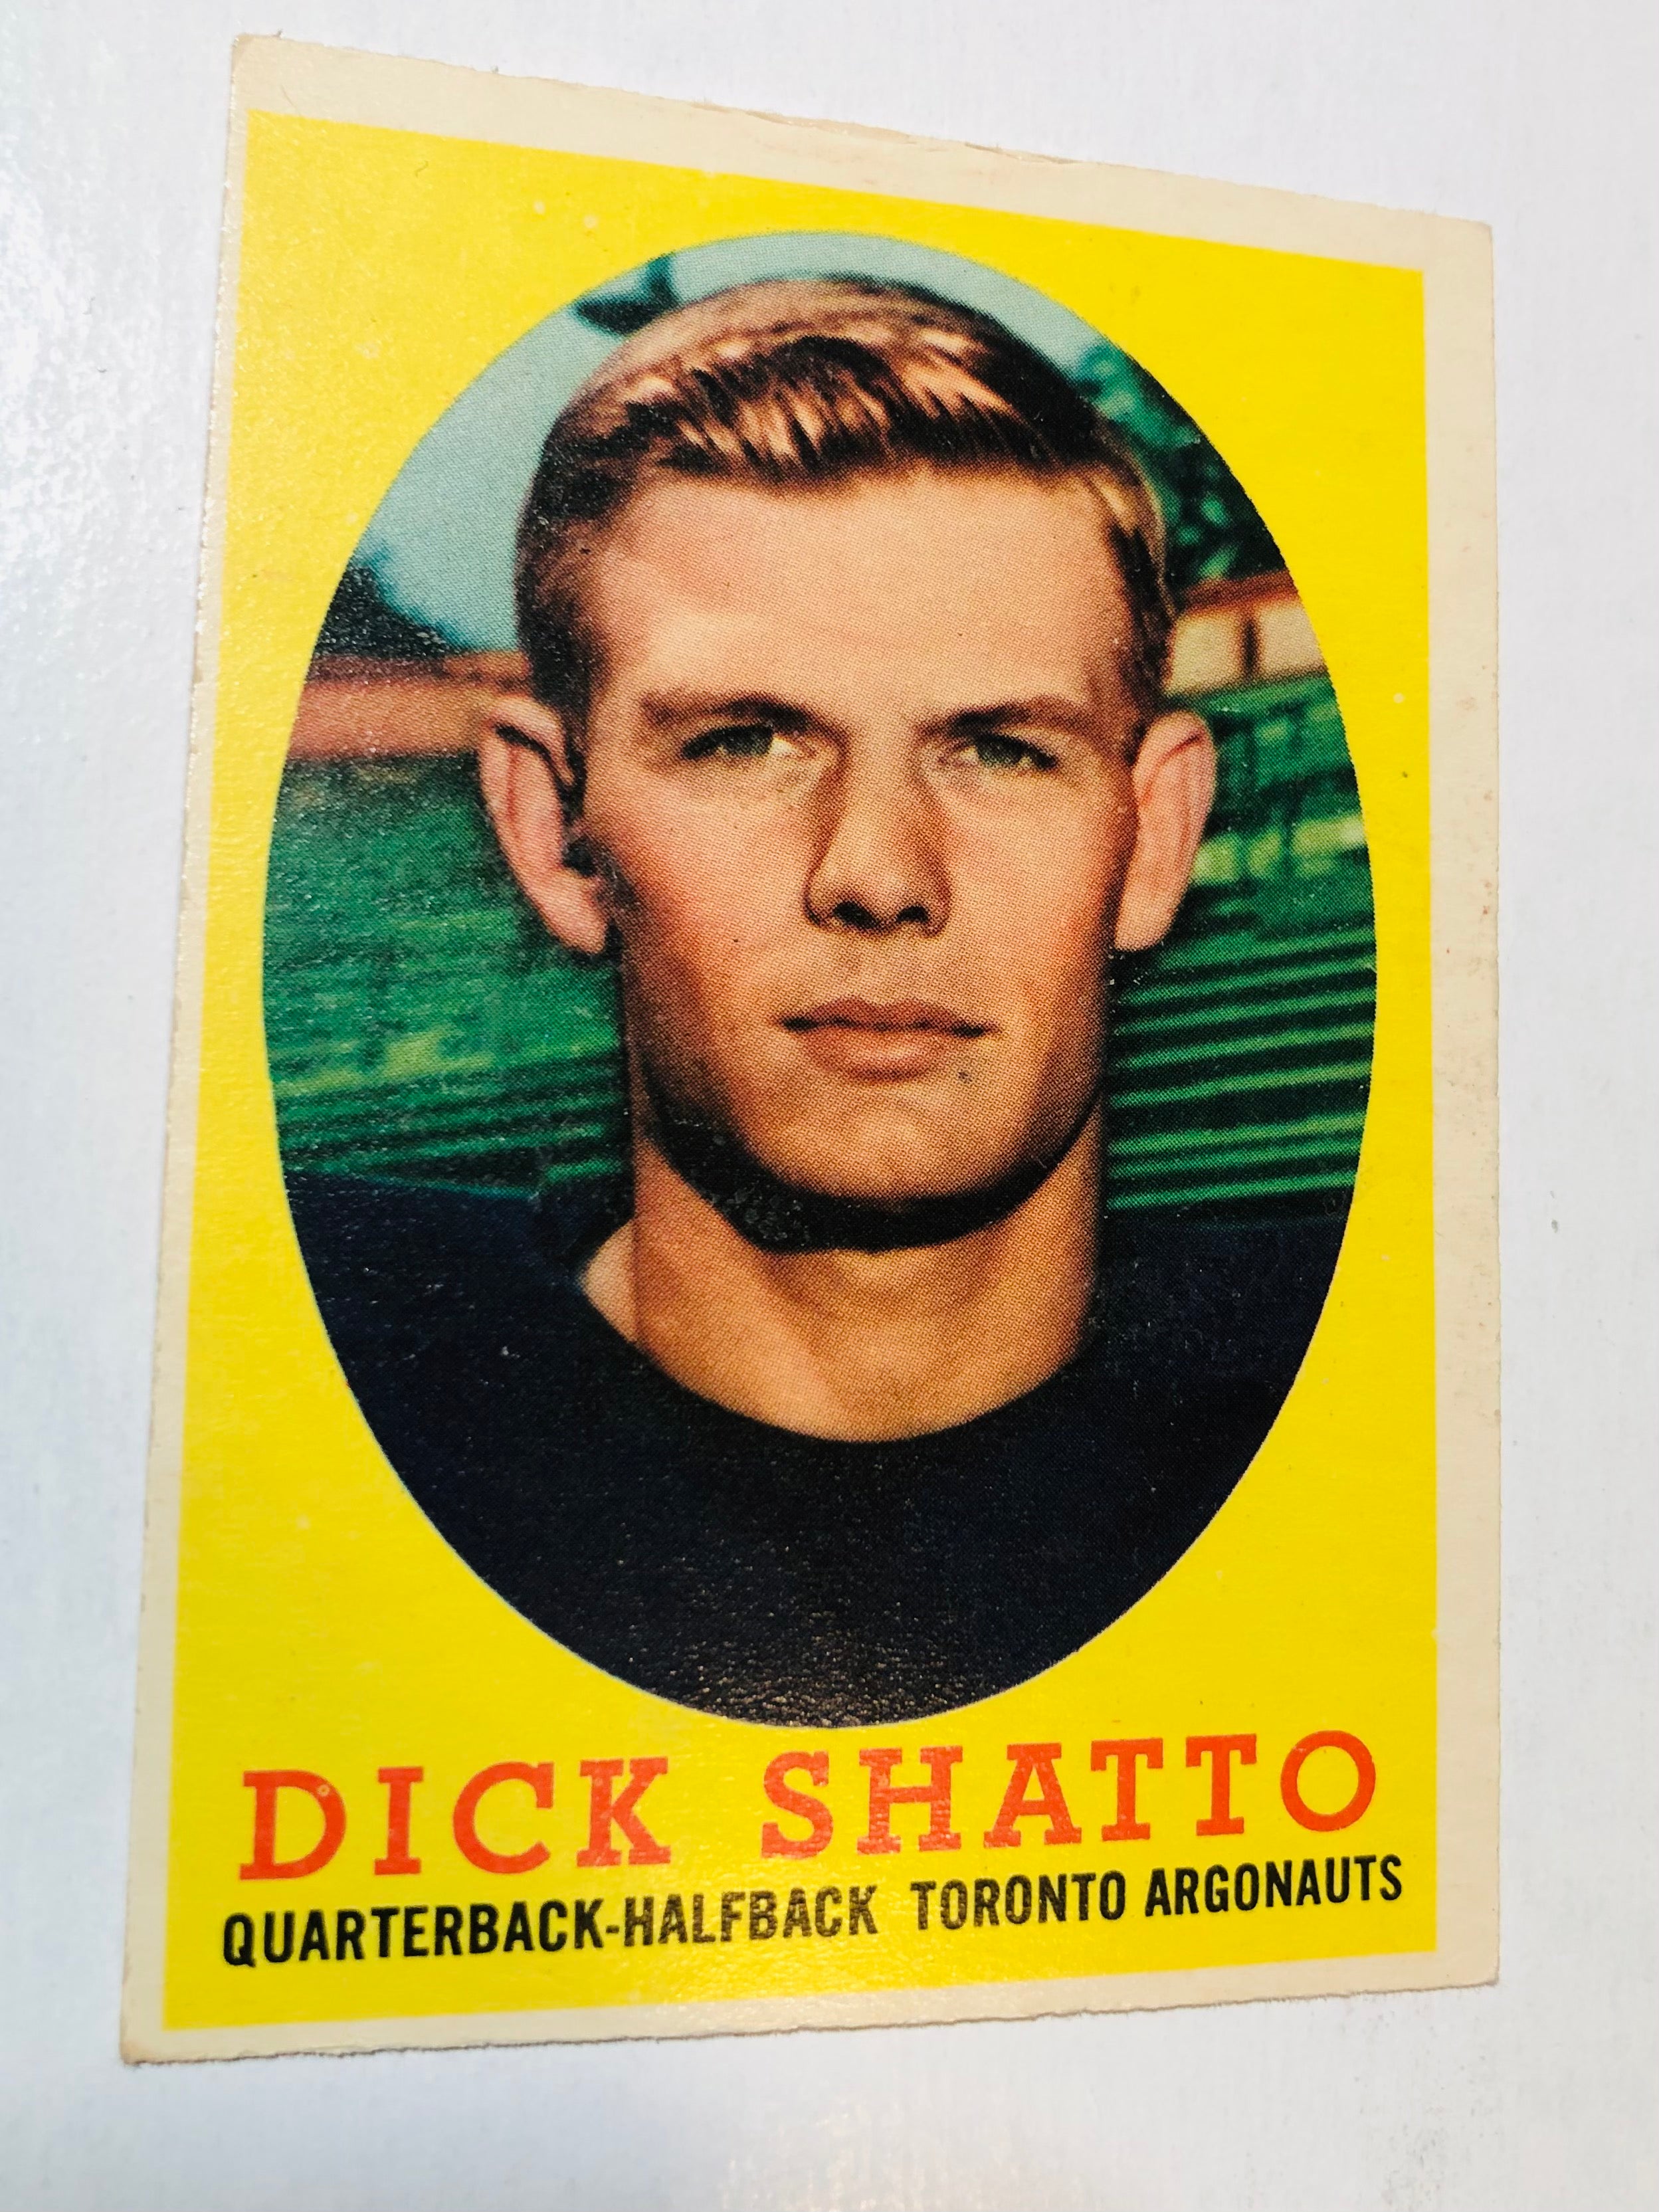 1958 Topps CFL football Dick Shatto rookie card